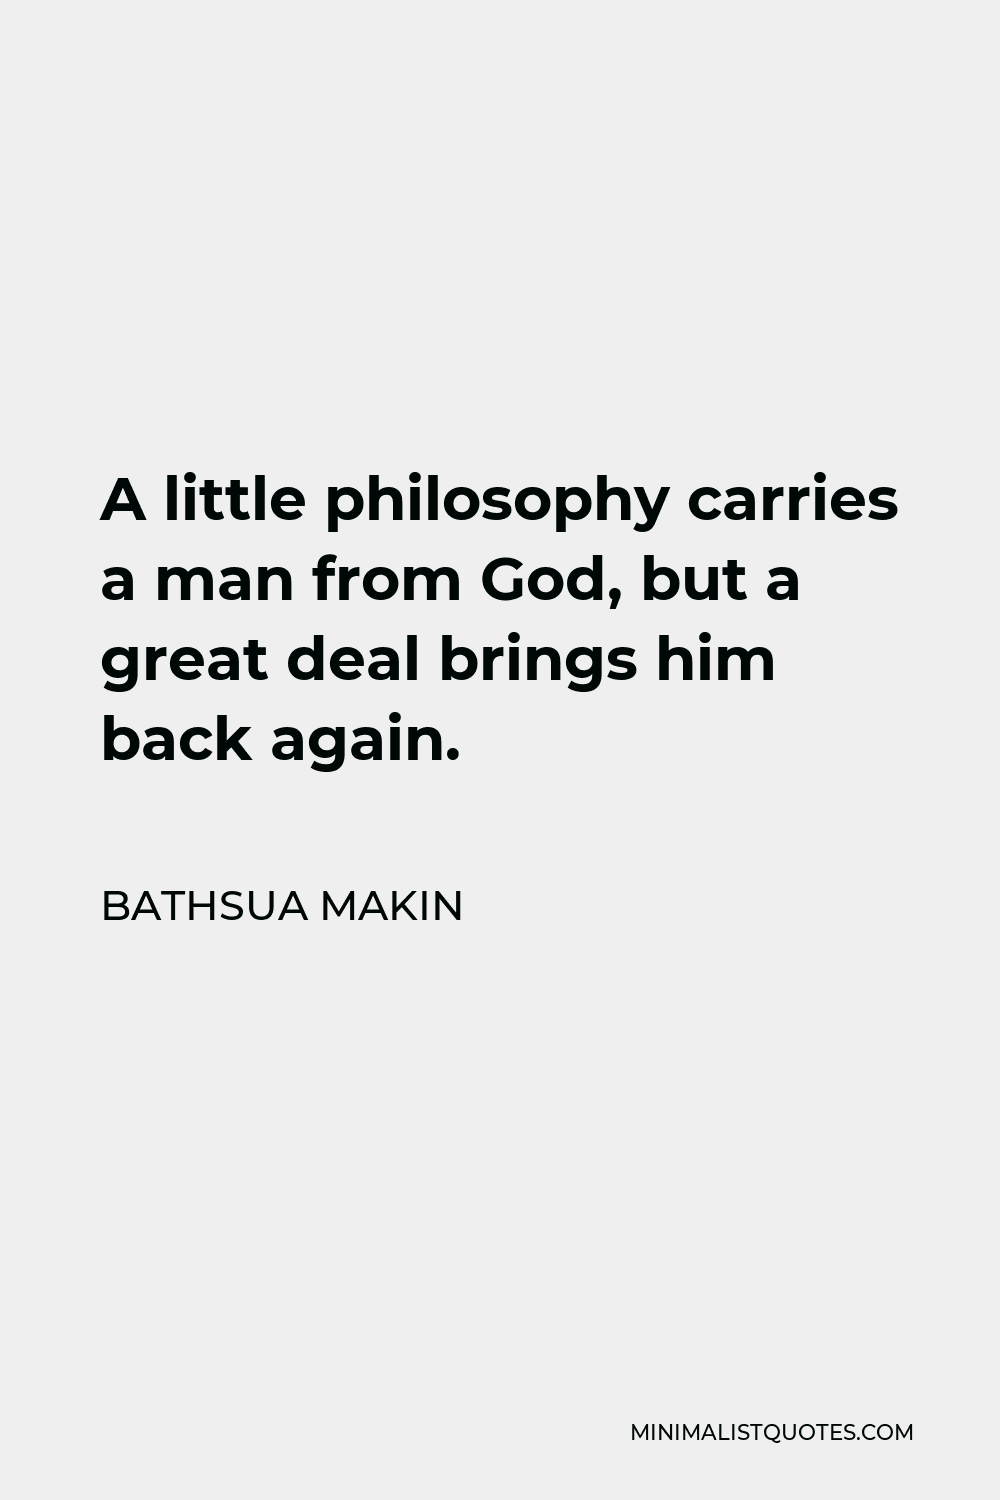 Bathsua Makin Quote - A little philosophy carries a man from God, but a great deal brings him back again.